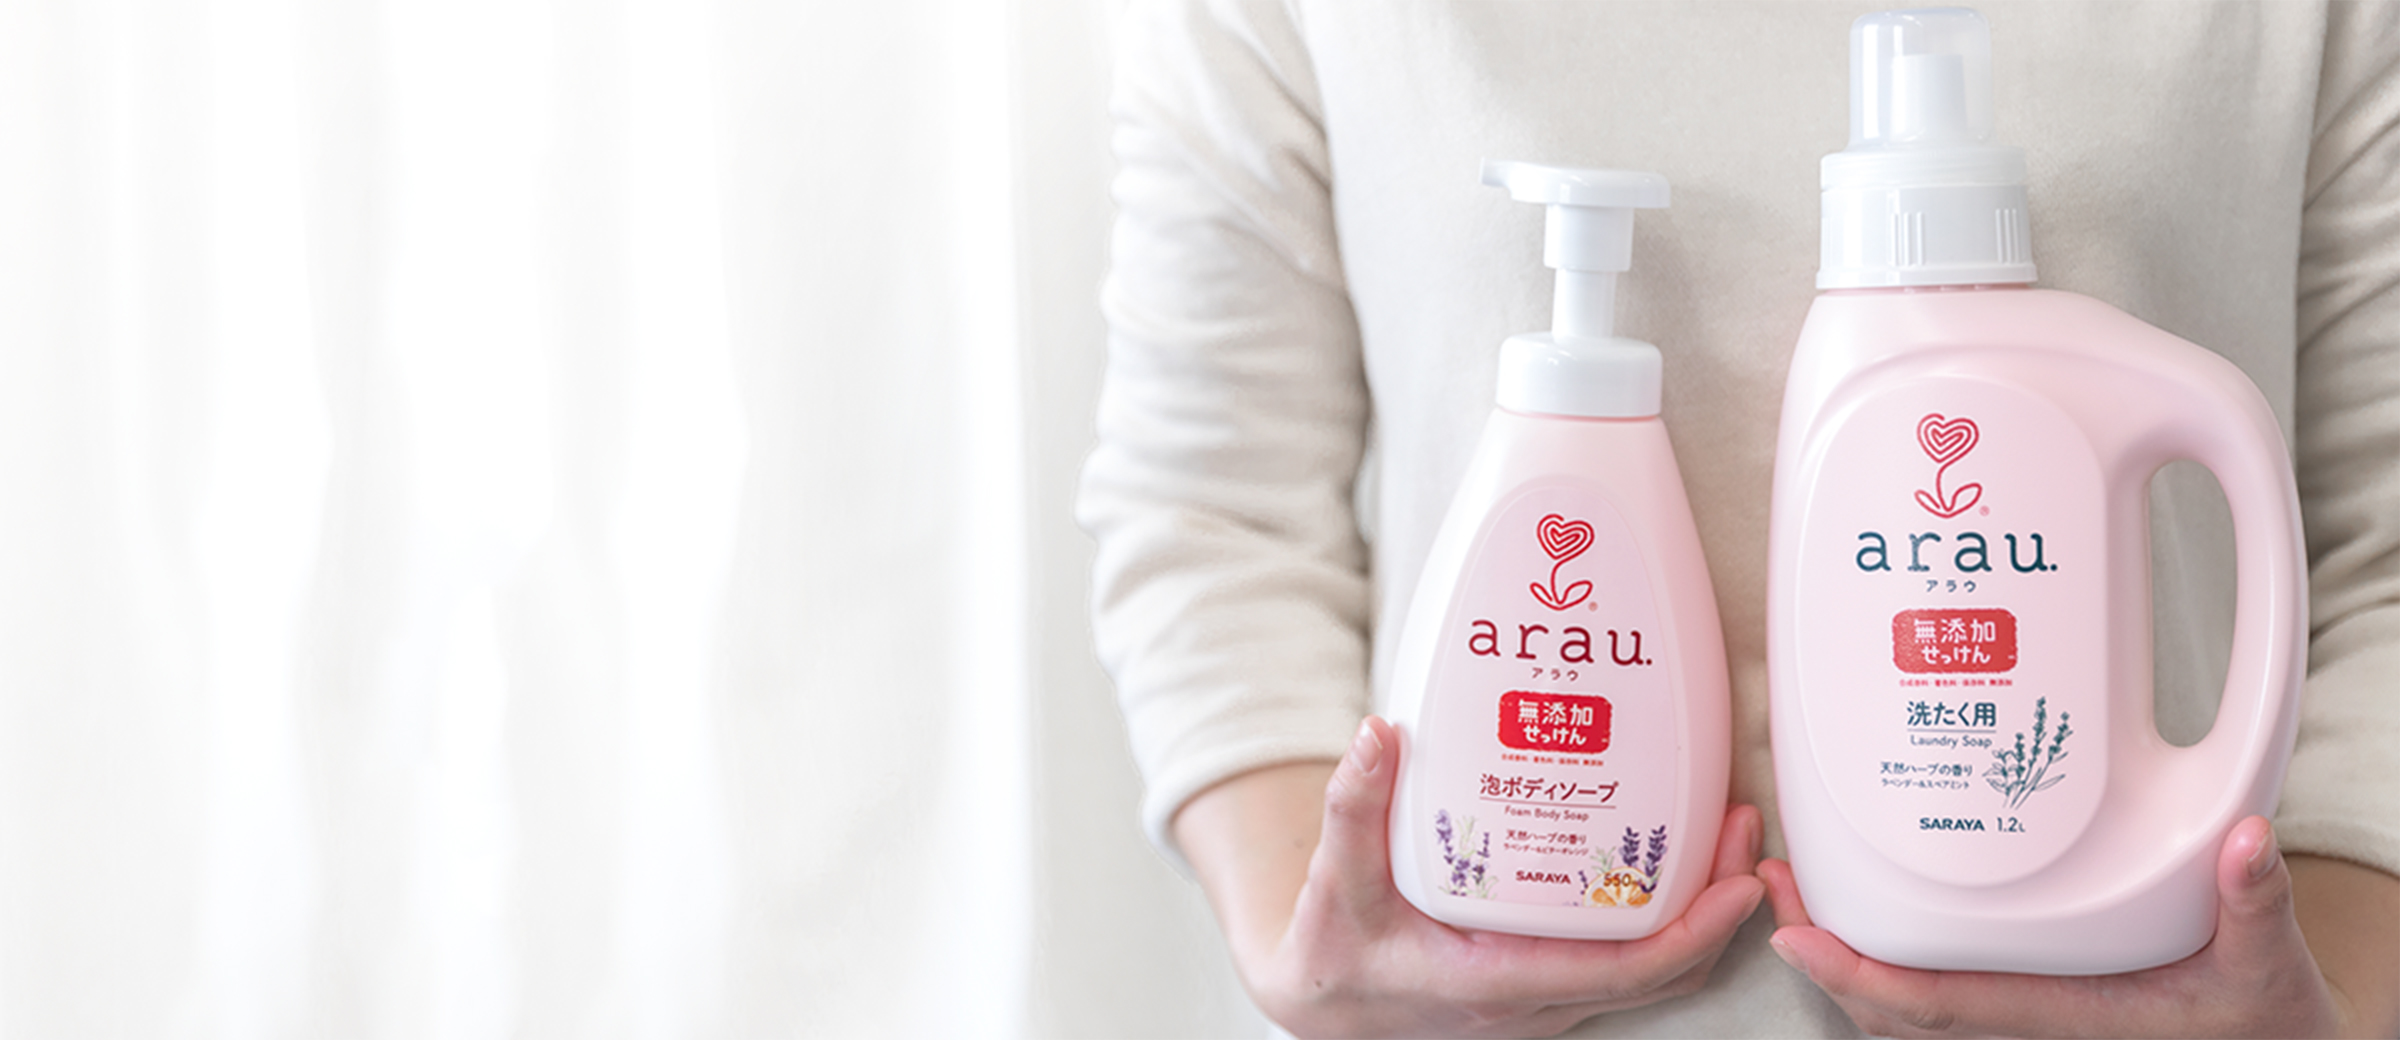 Natural products that protect your family. That's what arau. is all about.